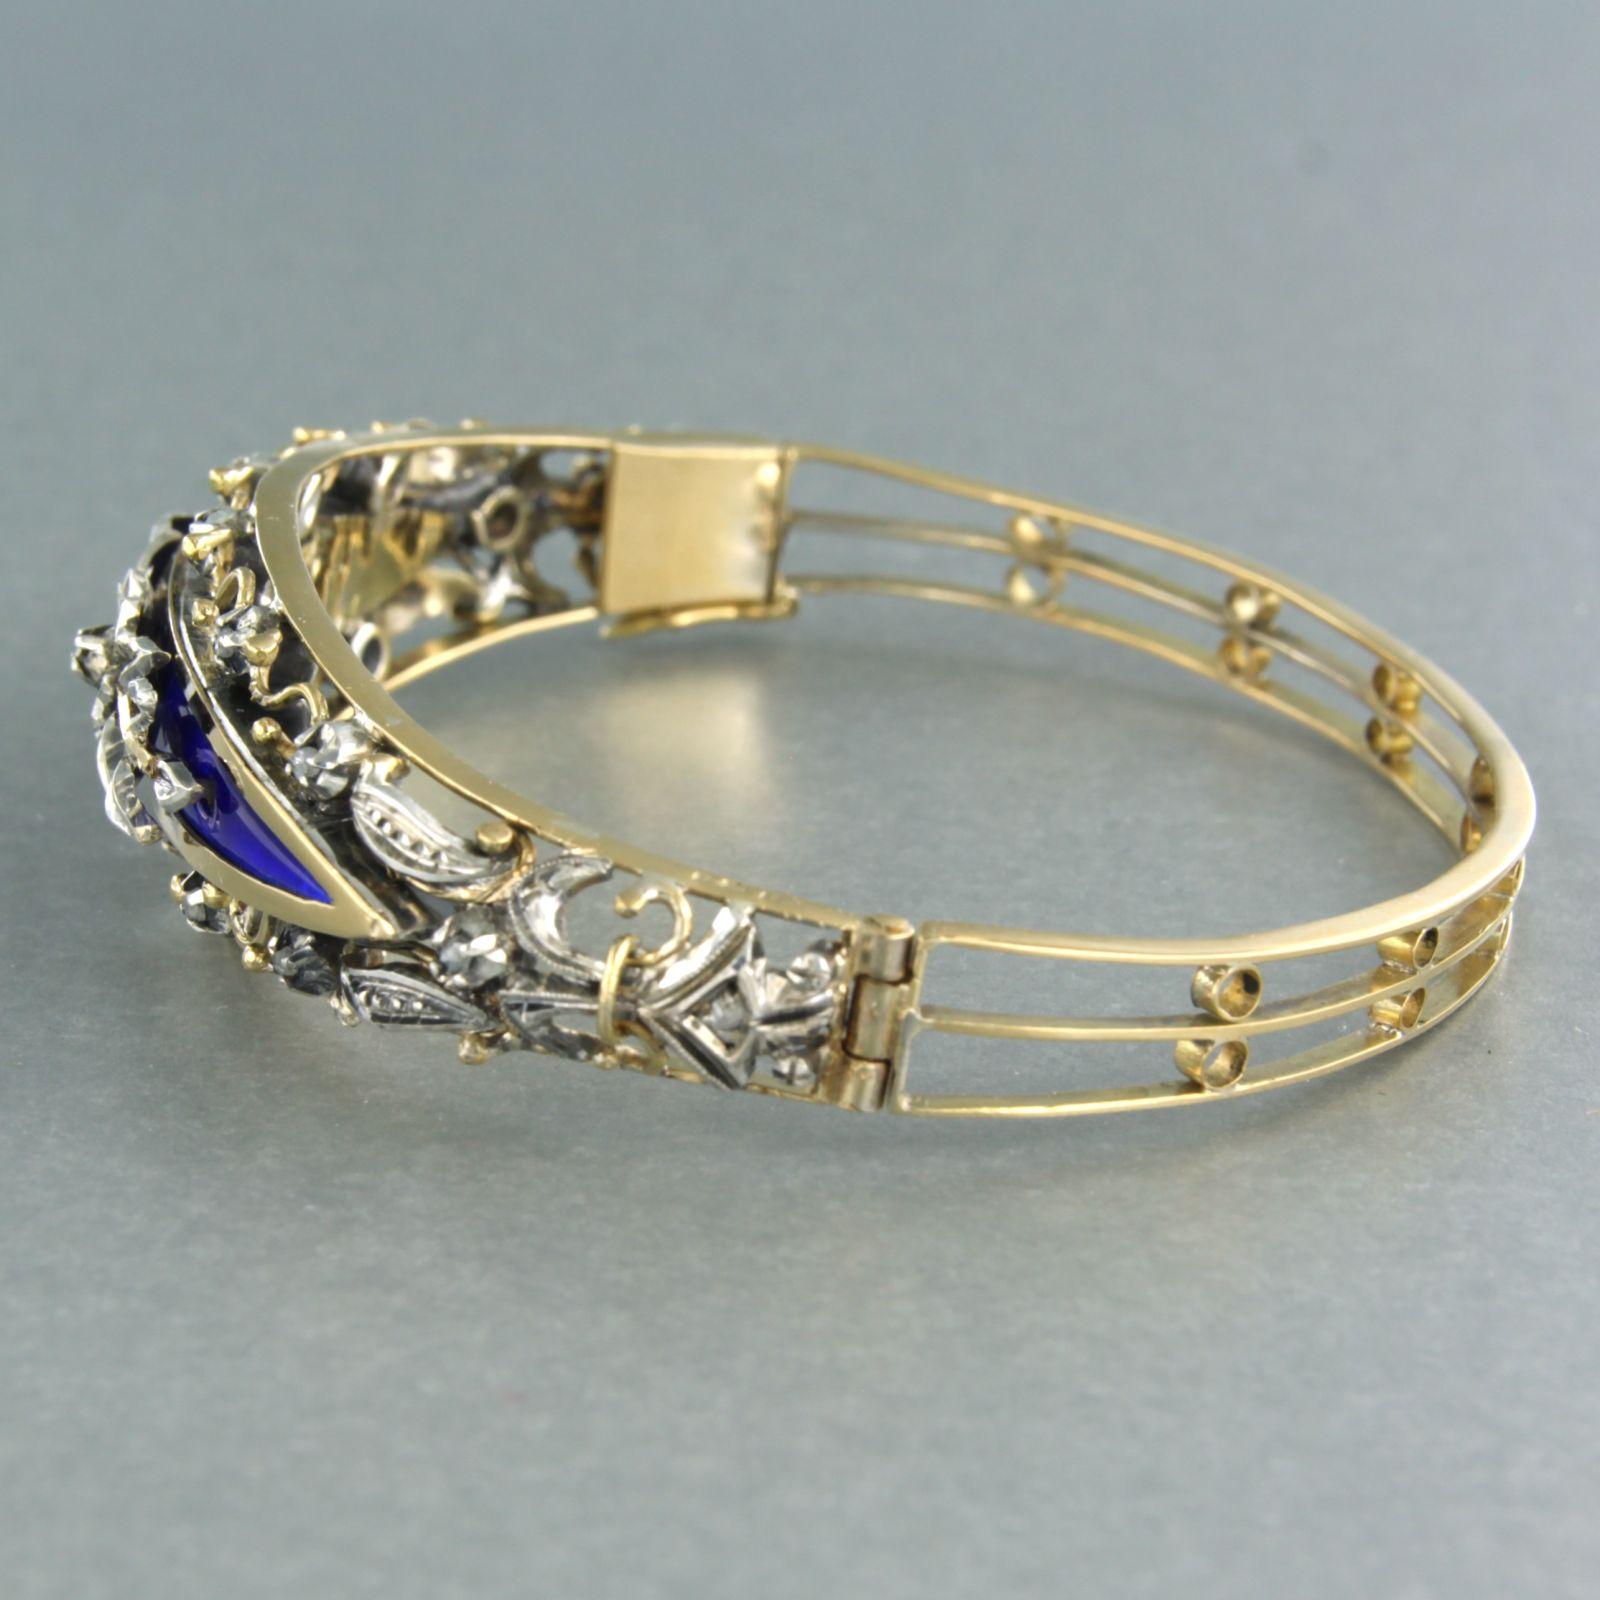 Bracelet with blue enamel and diamonds 18k gold with silver In Good Condition For Sale In The Hague, ZH